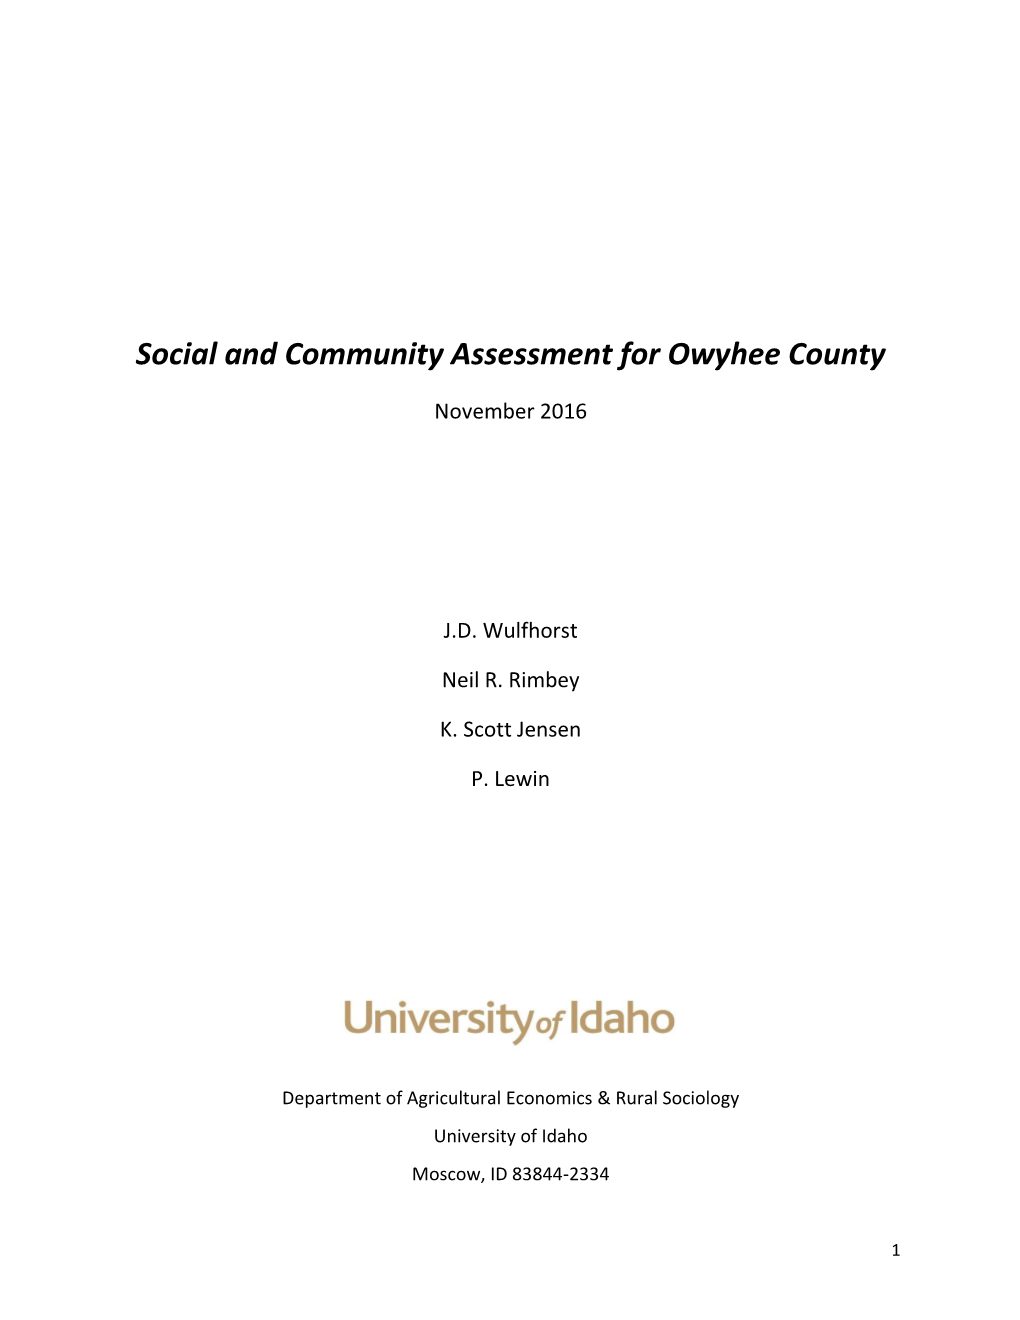 Social and Community Assessment for Owyhee County